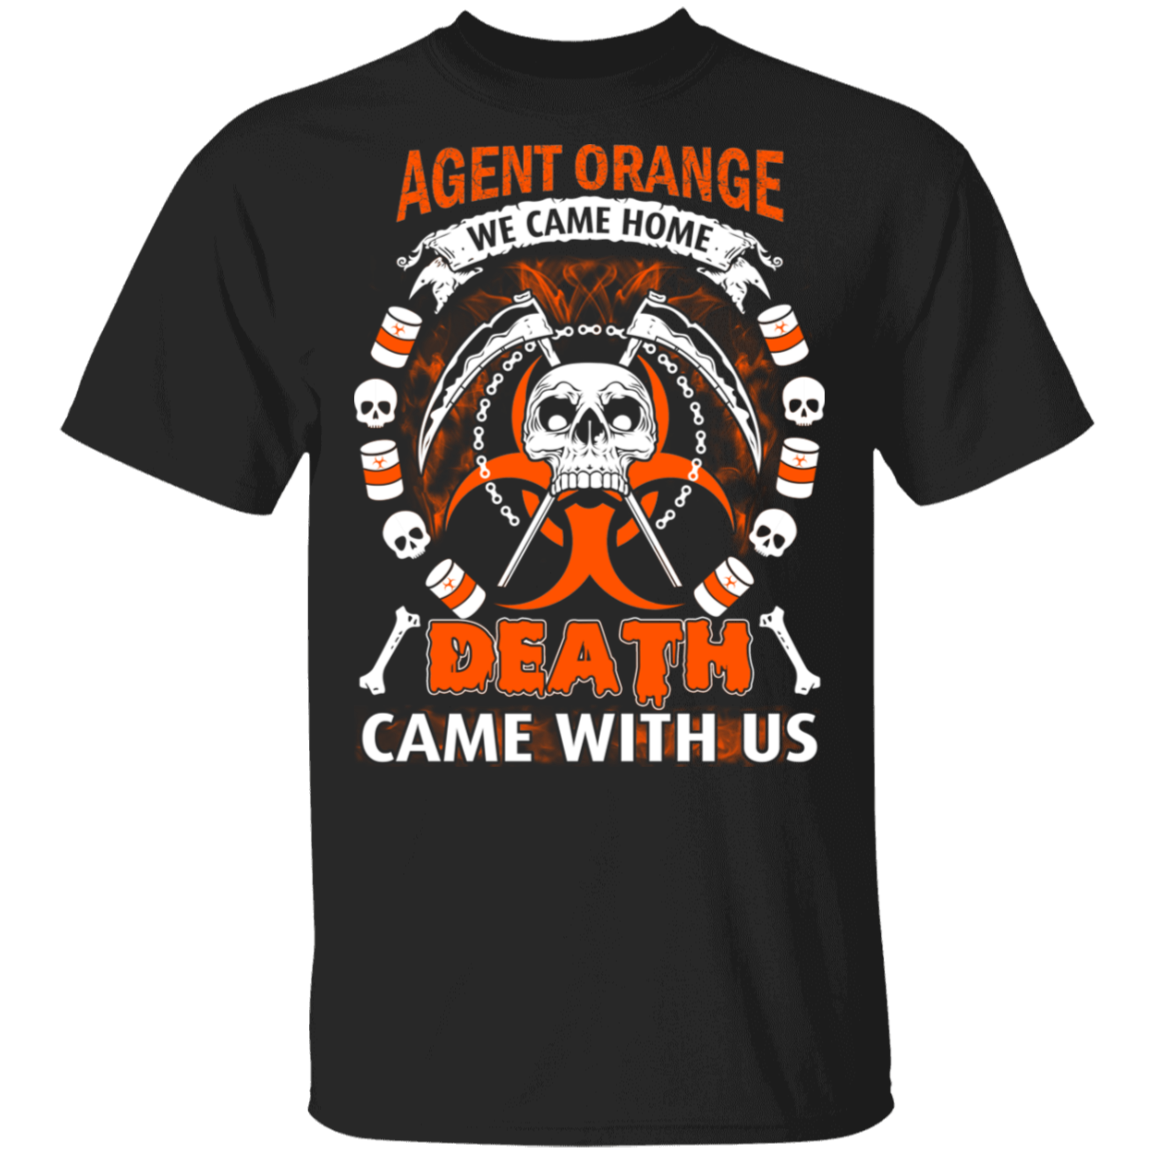 Vietnam Veteran: Agent Orange We Came Home Death Came With Us T-Shirts ...